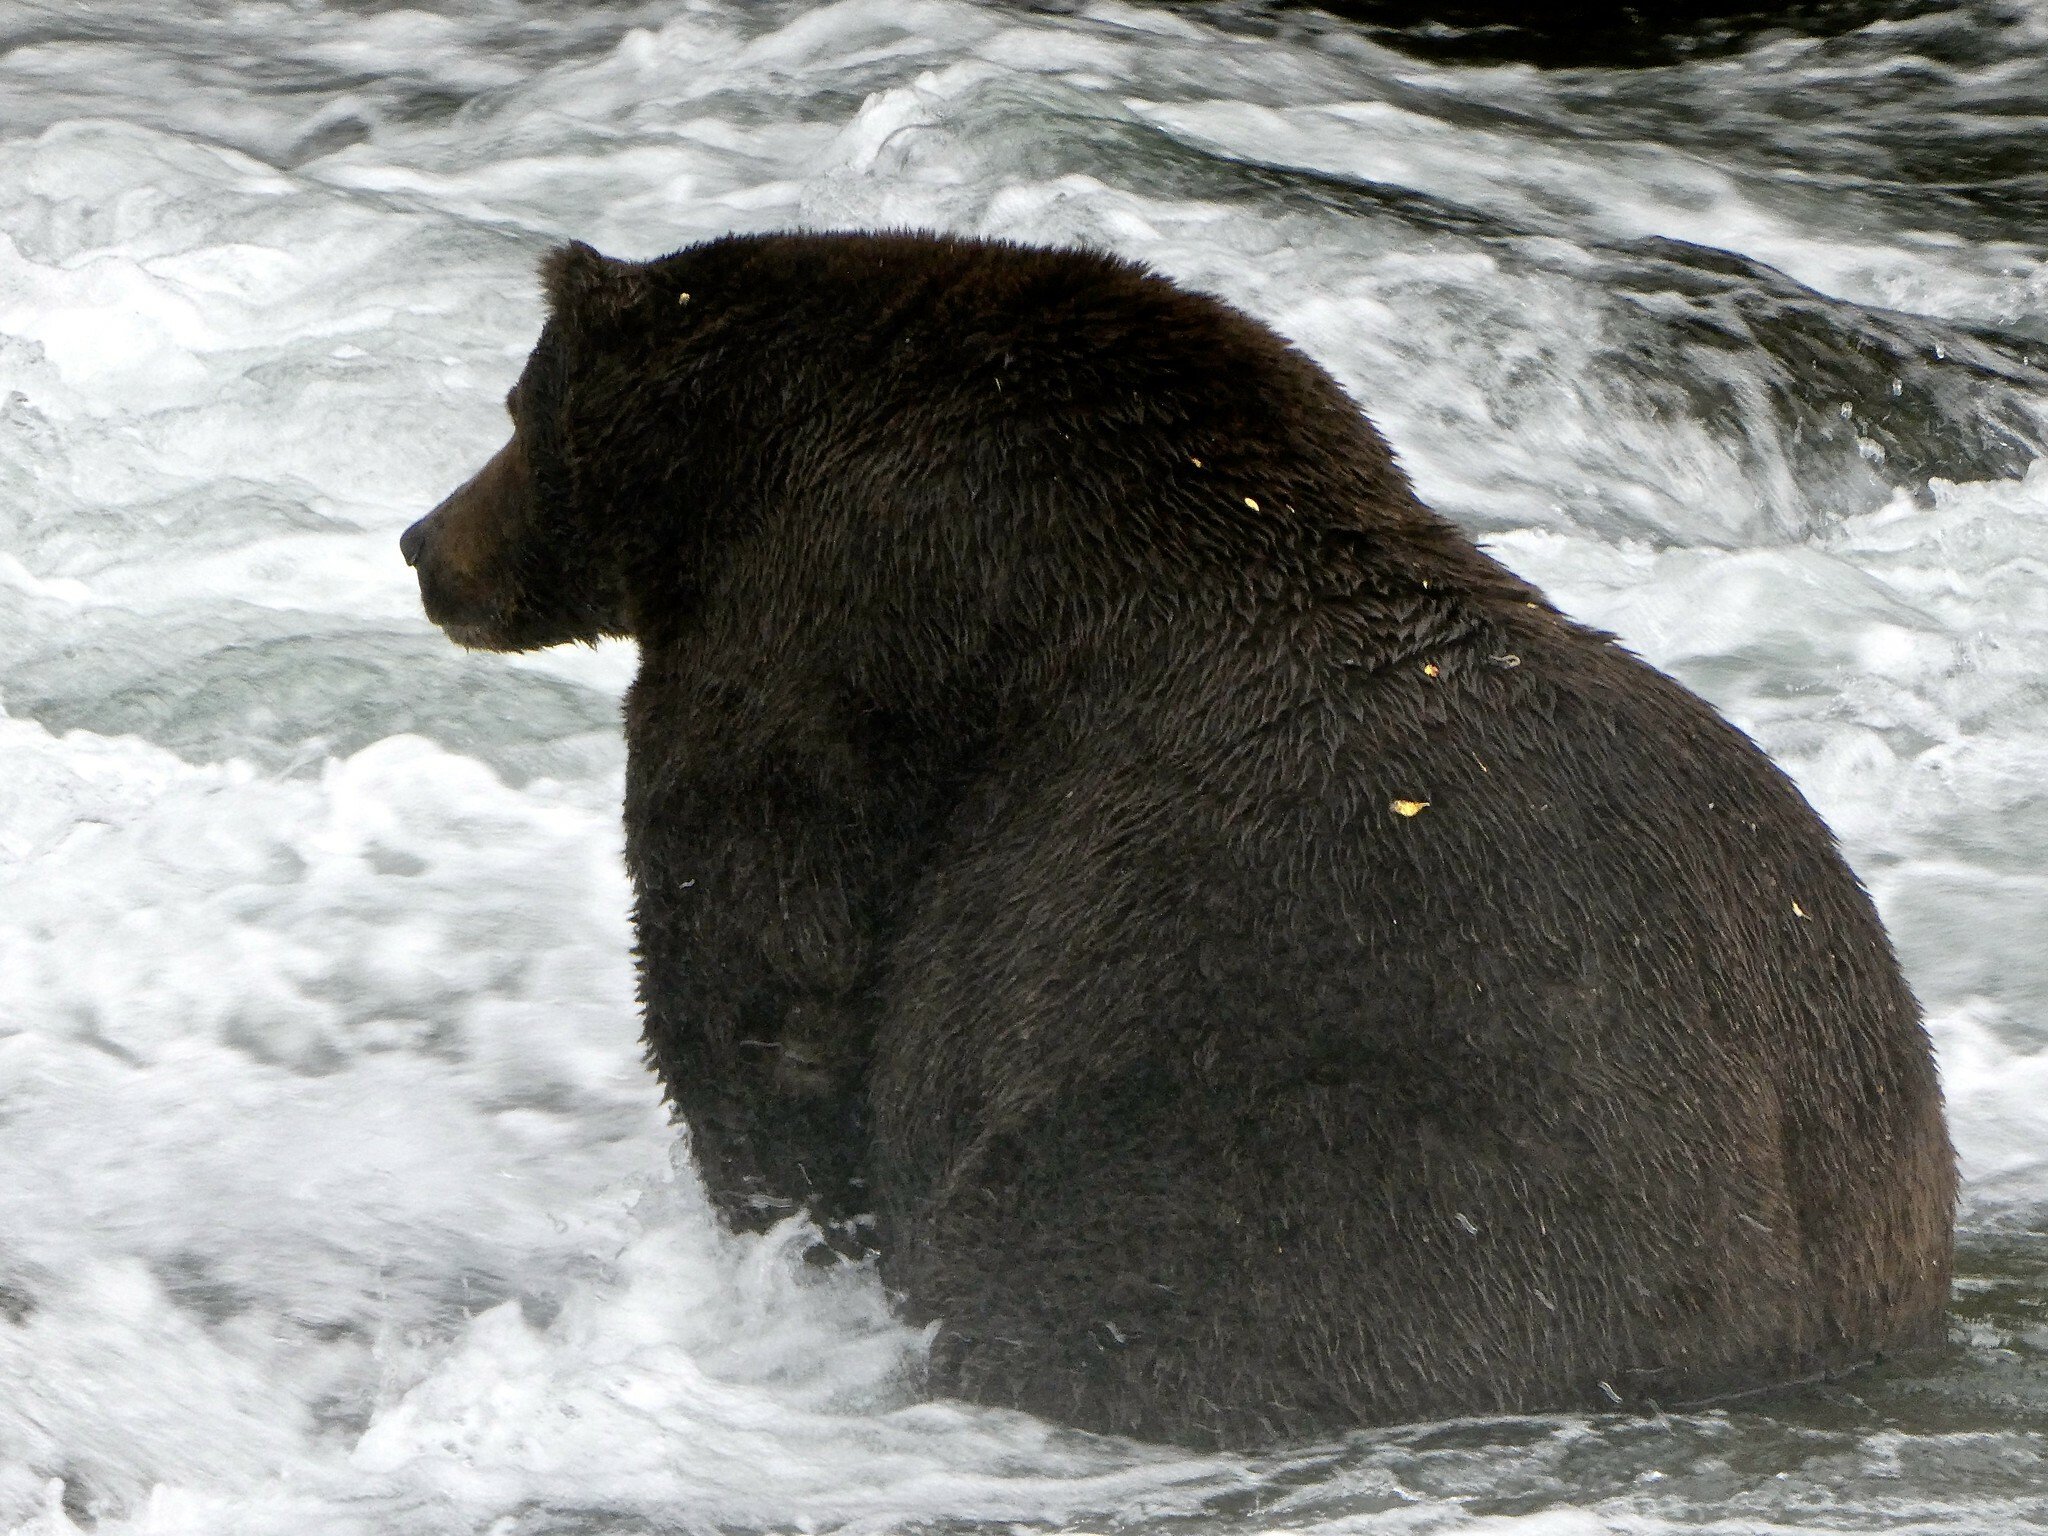 a very large bear in a river in Alaska